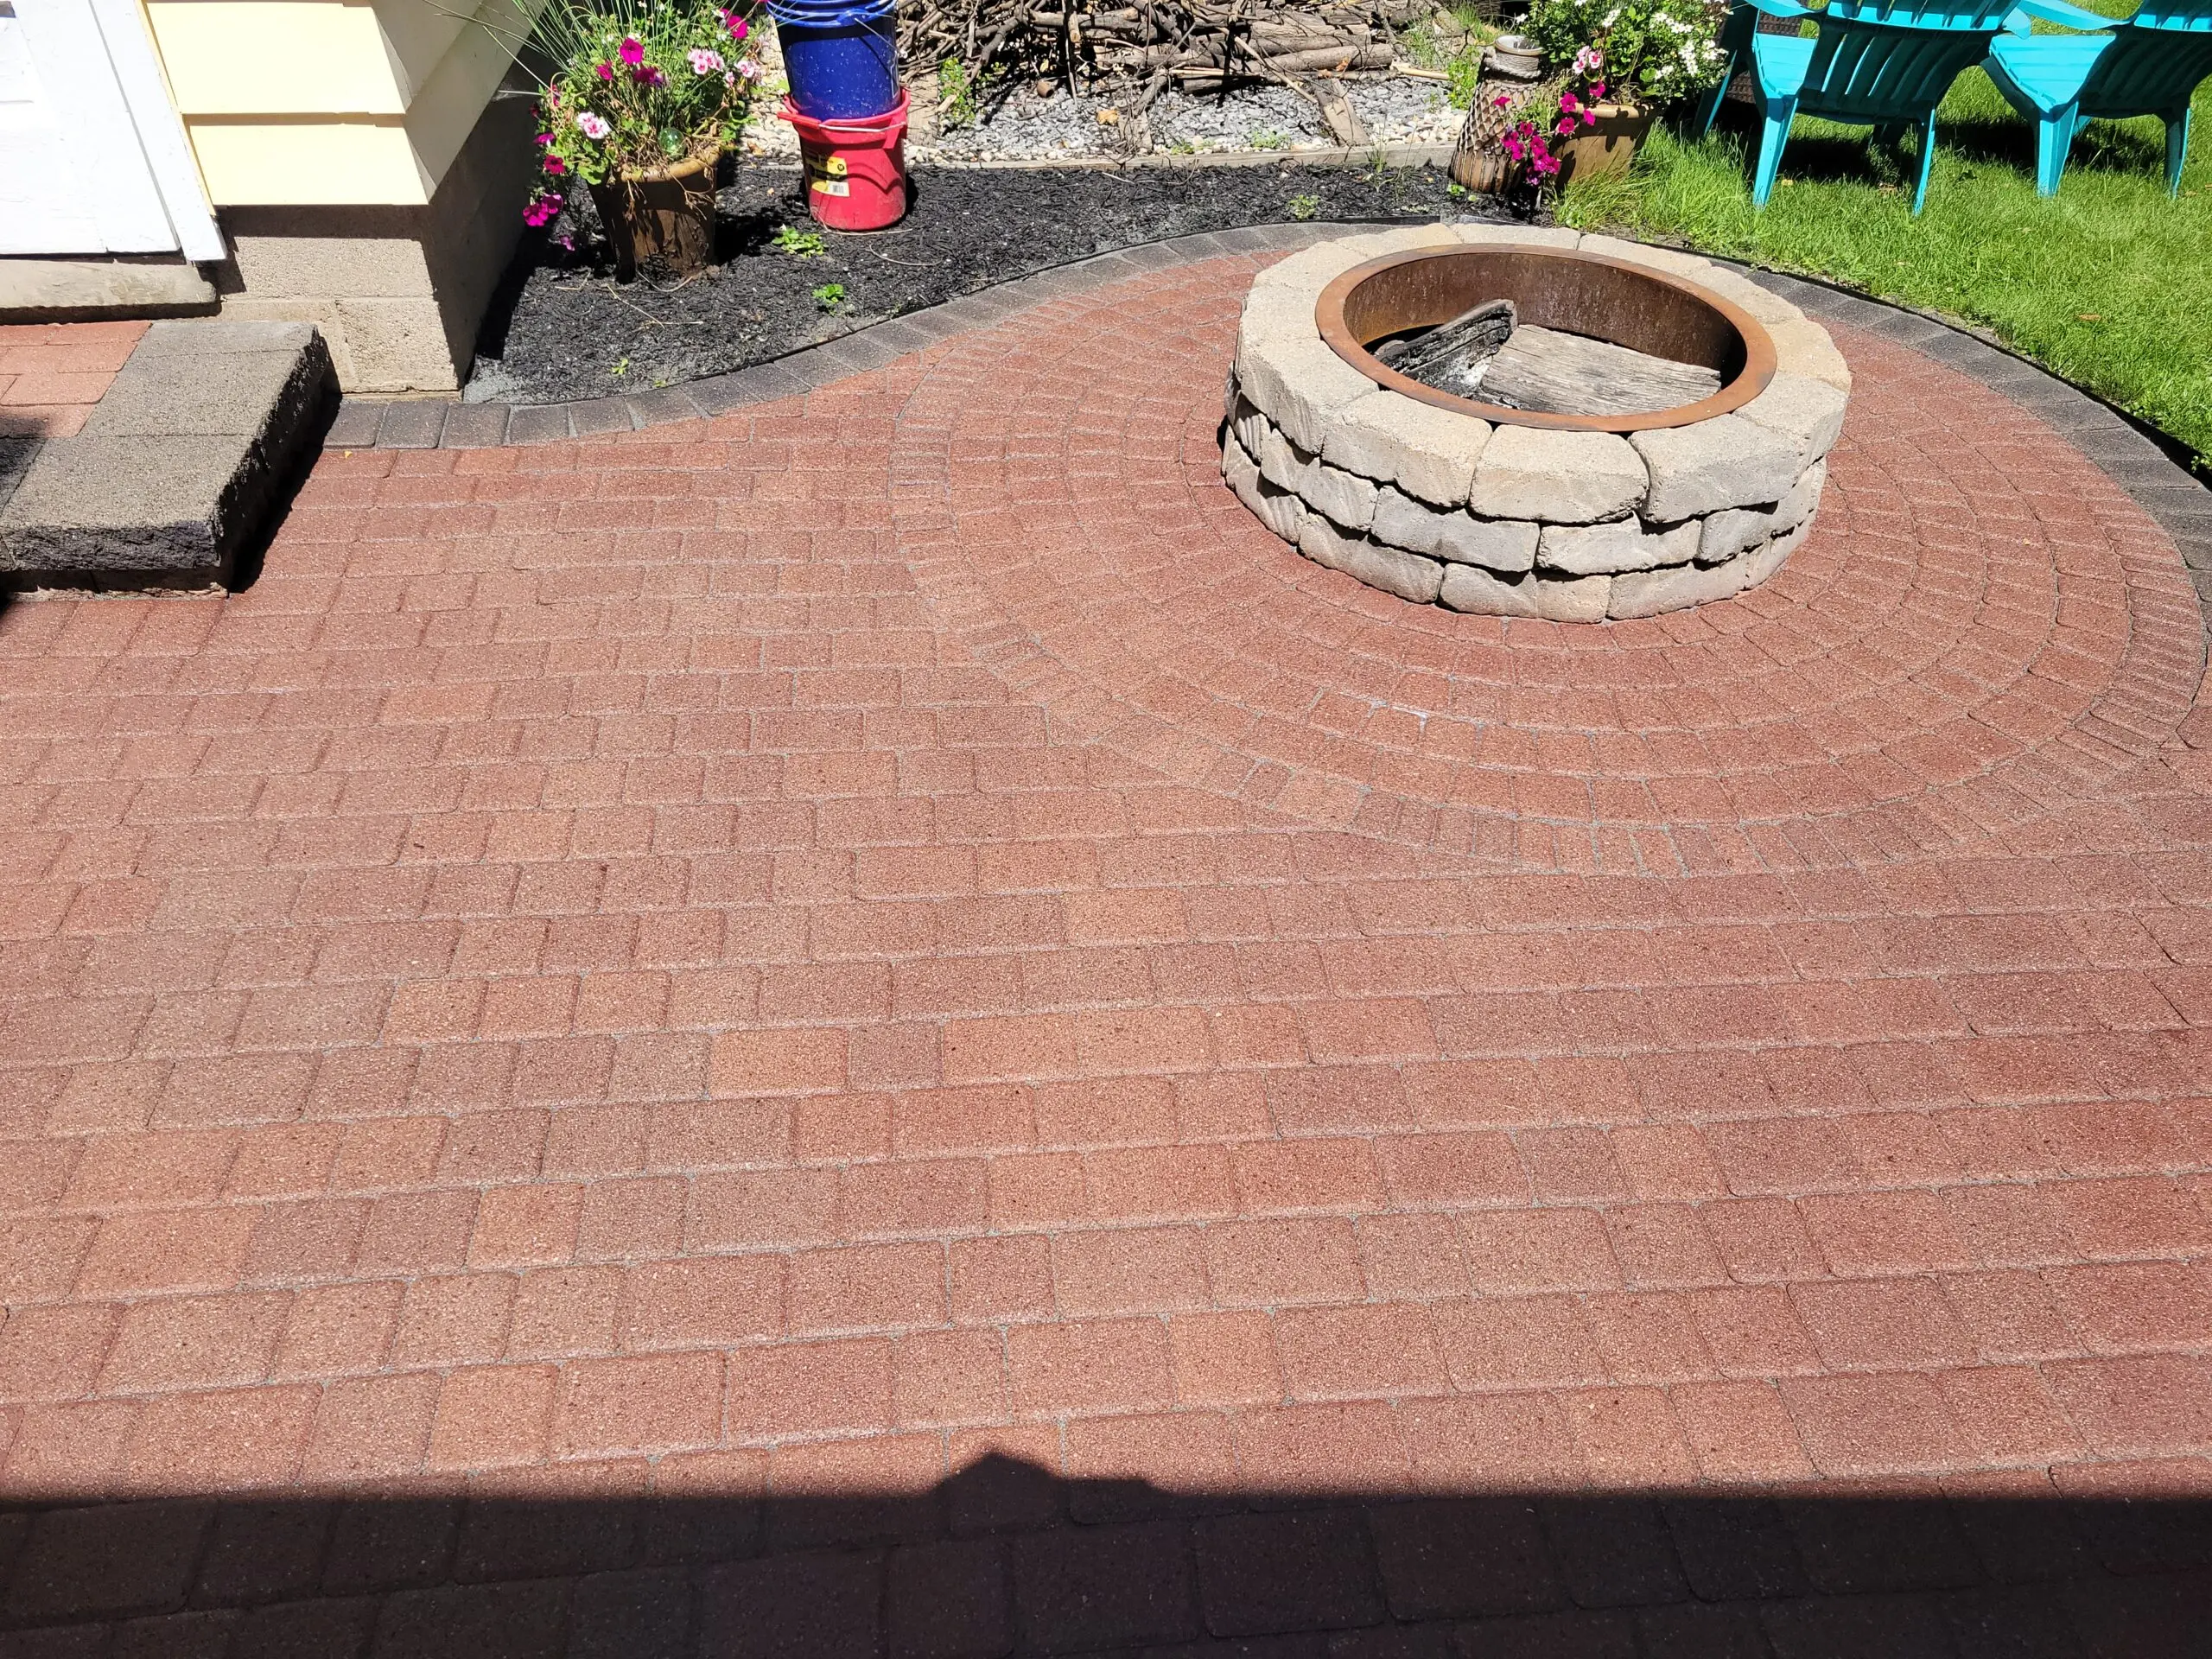 Pavers with grey polymeric sand filled into the joints and a sealed finish